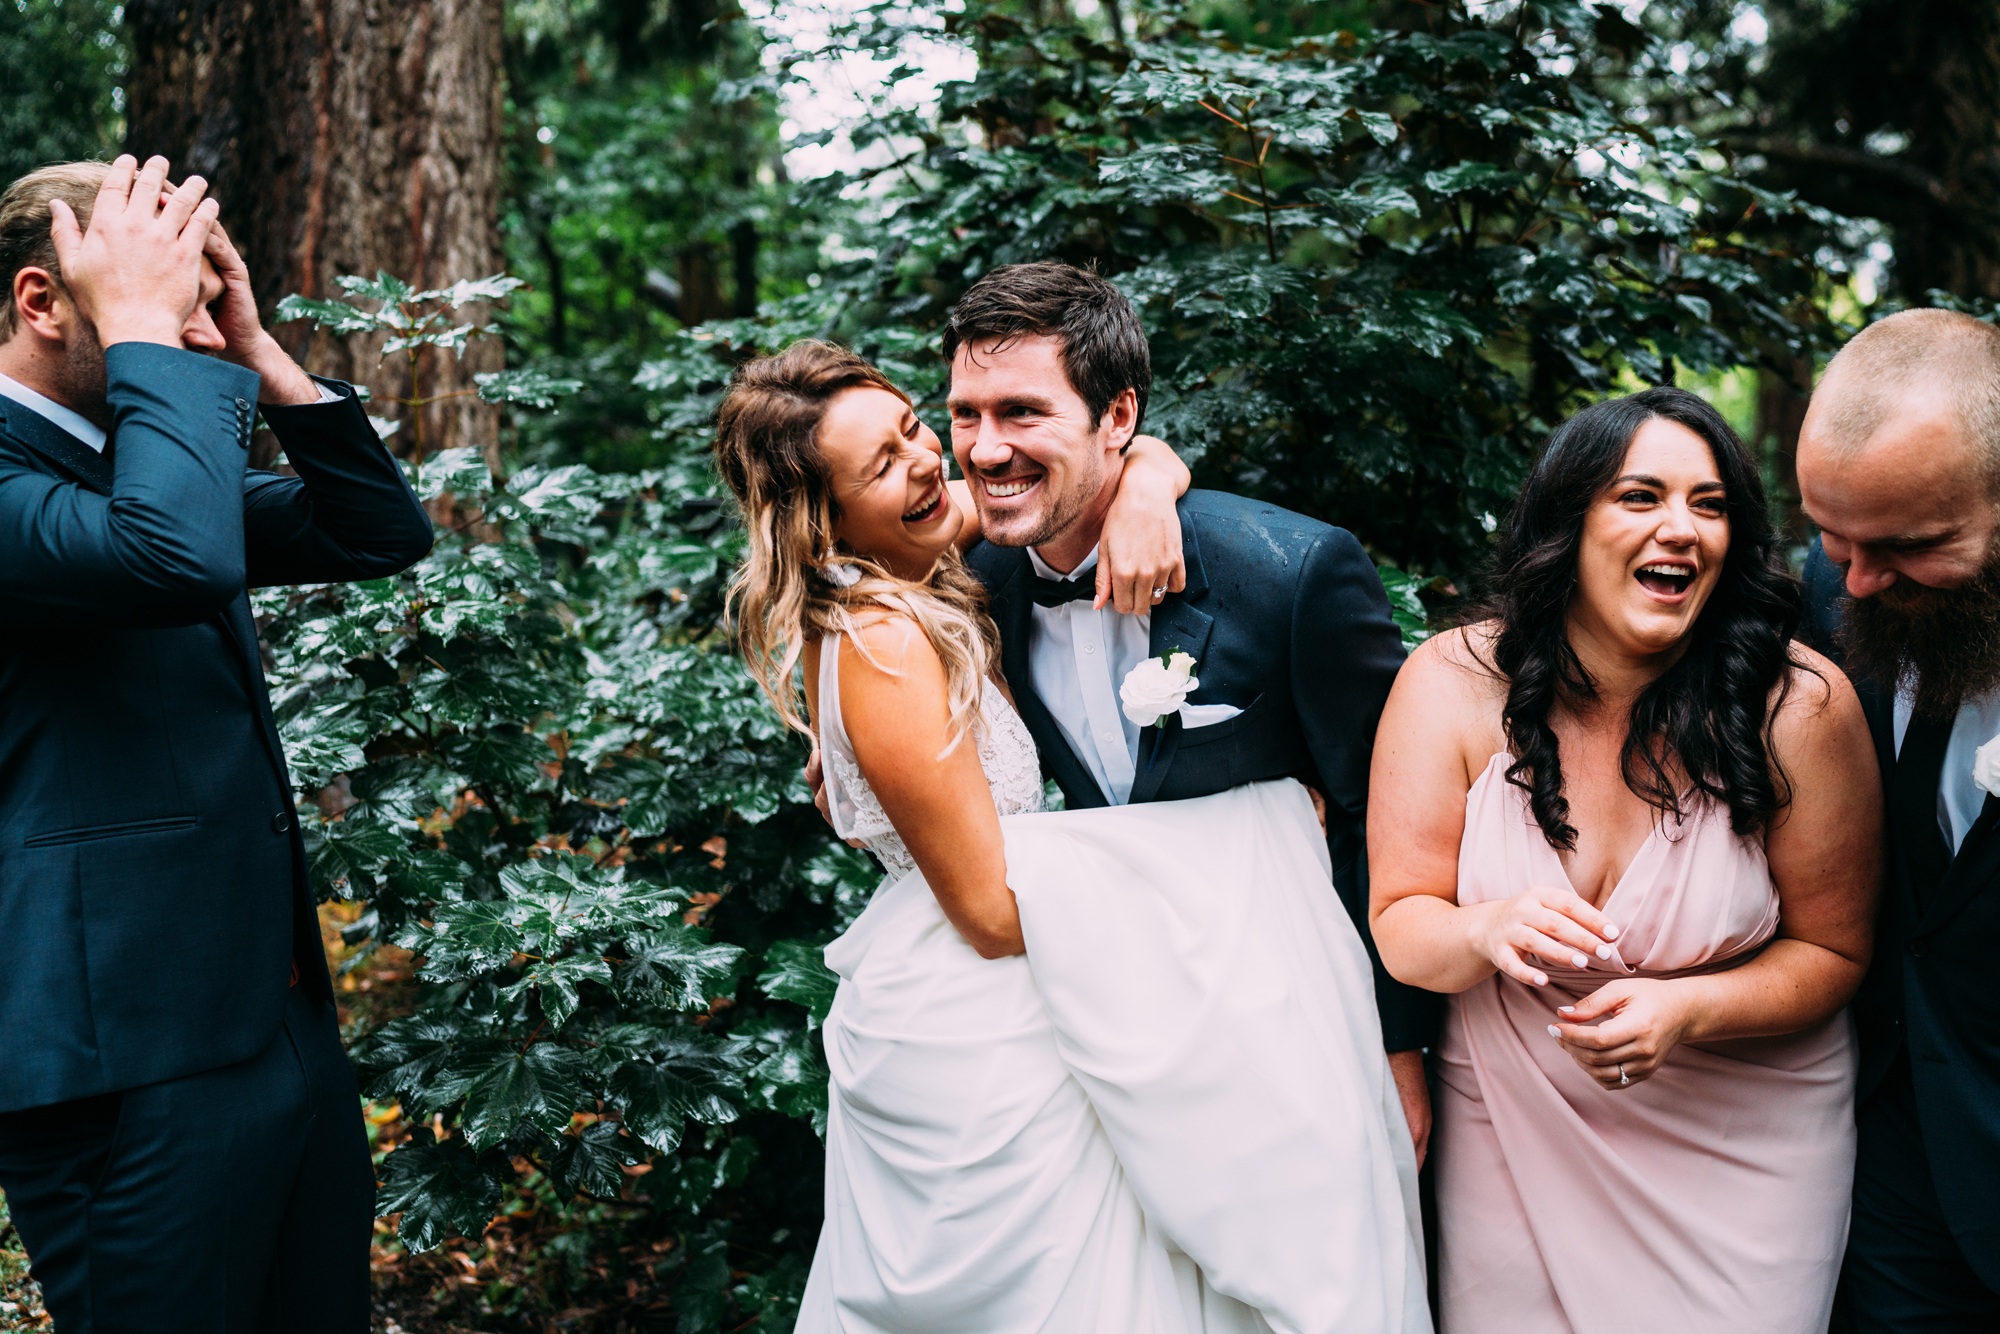 hilarious moment for bridal party after the wedding ceremony